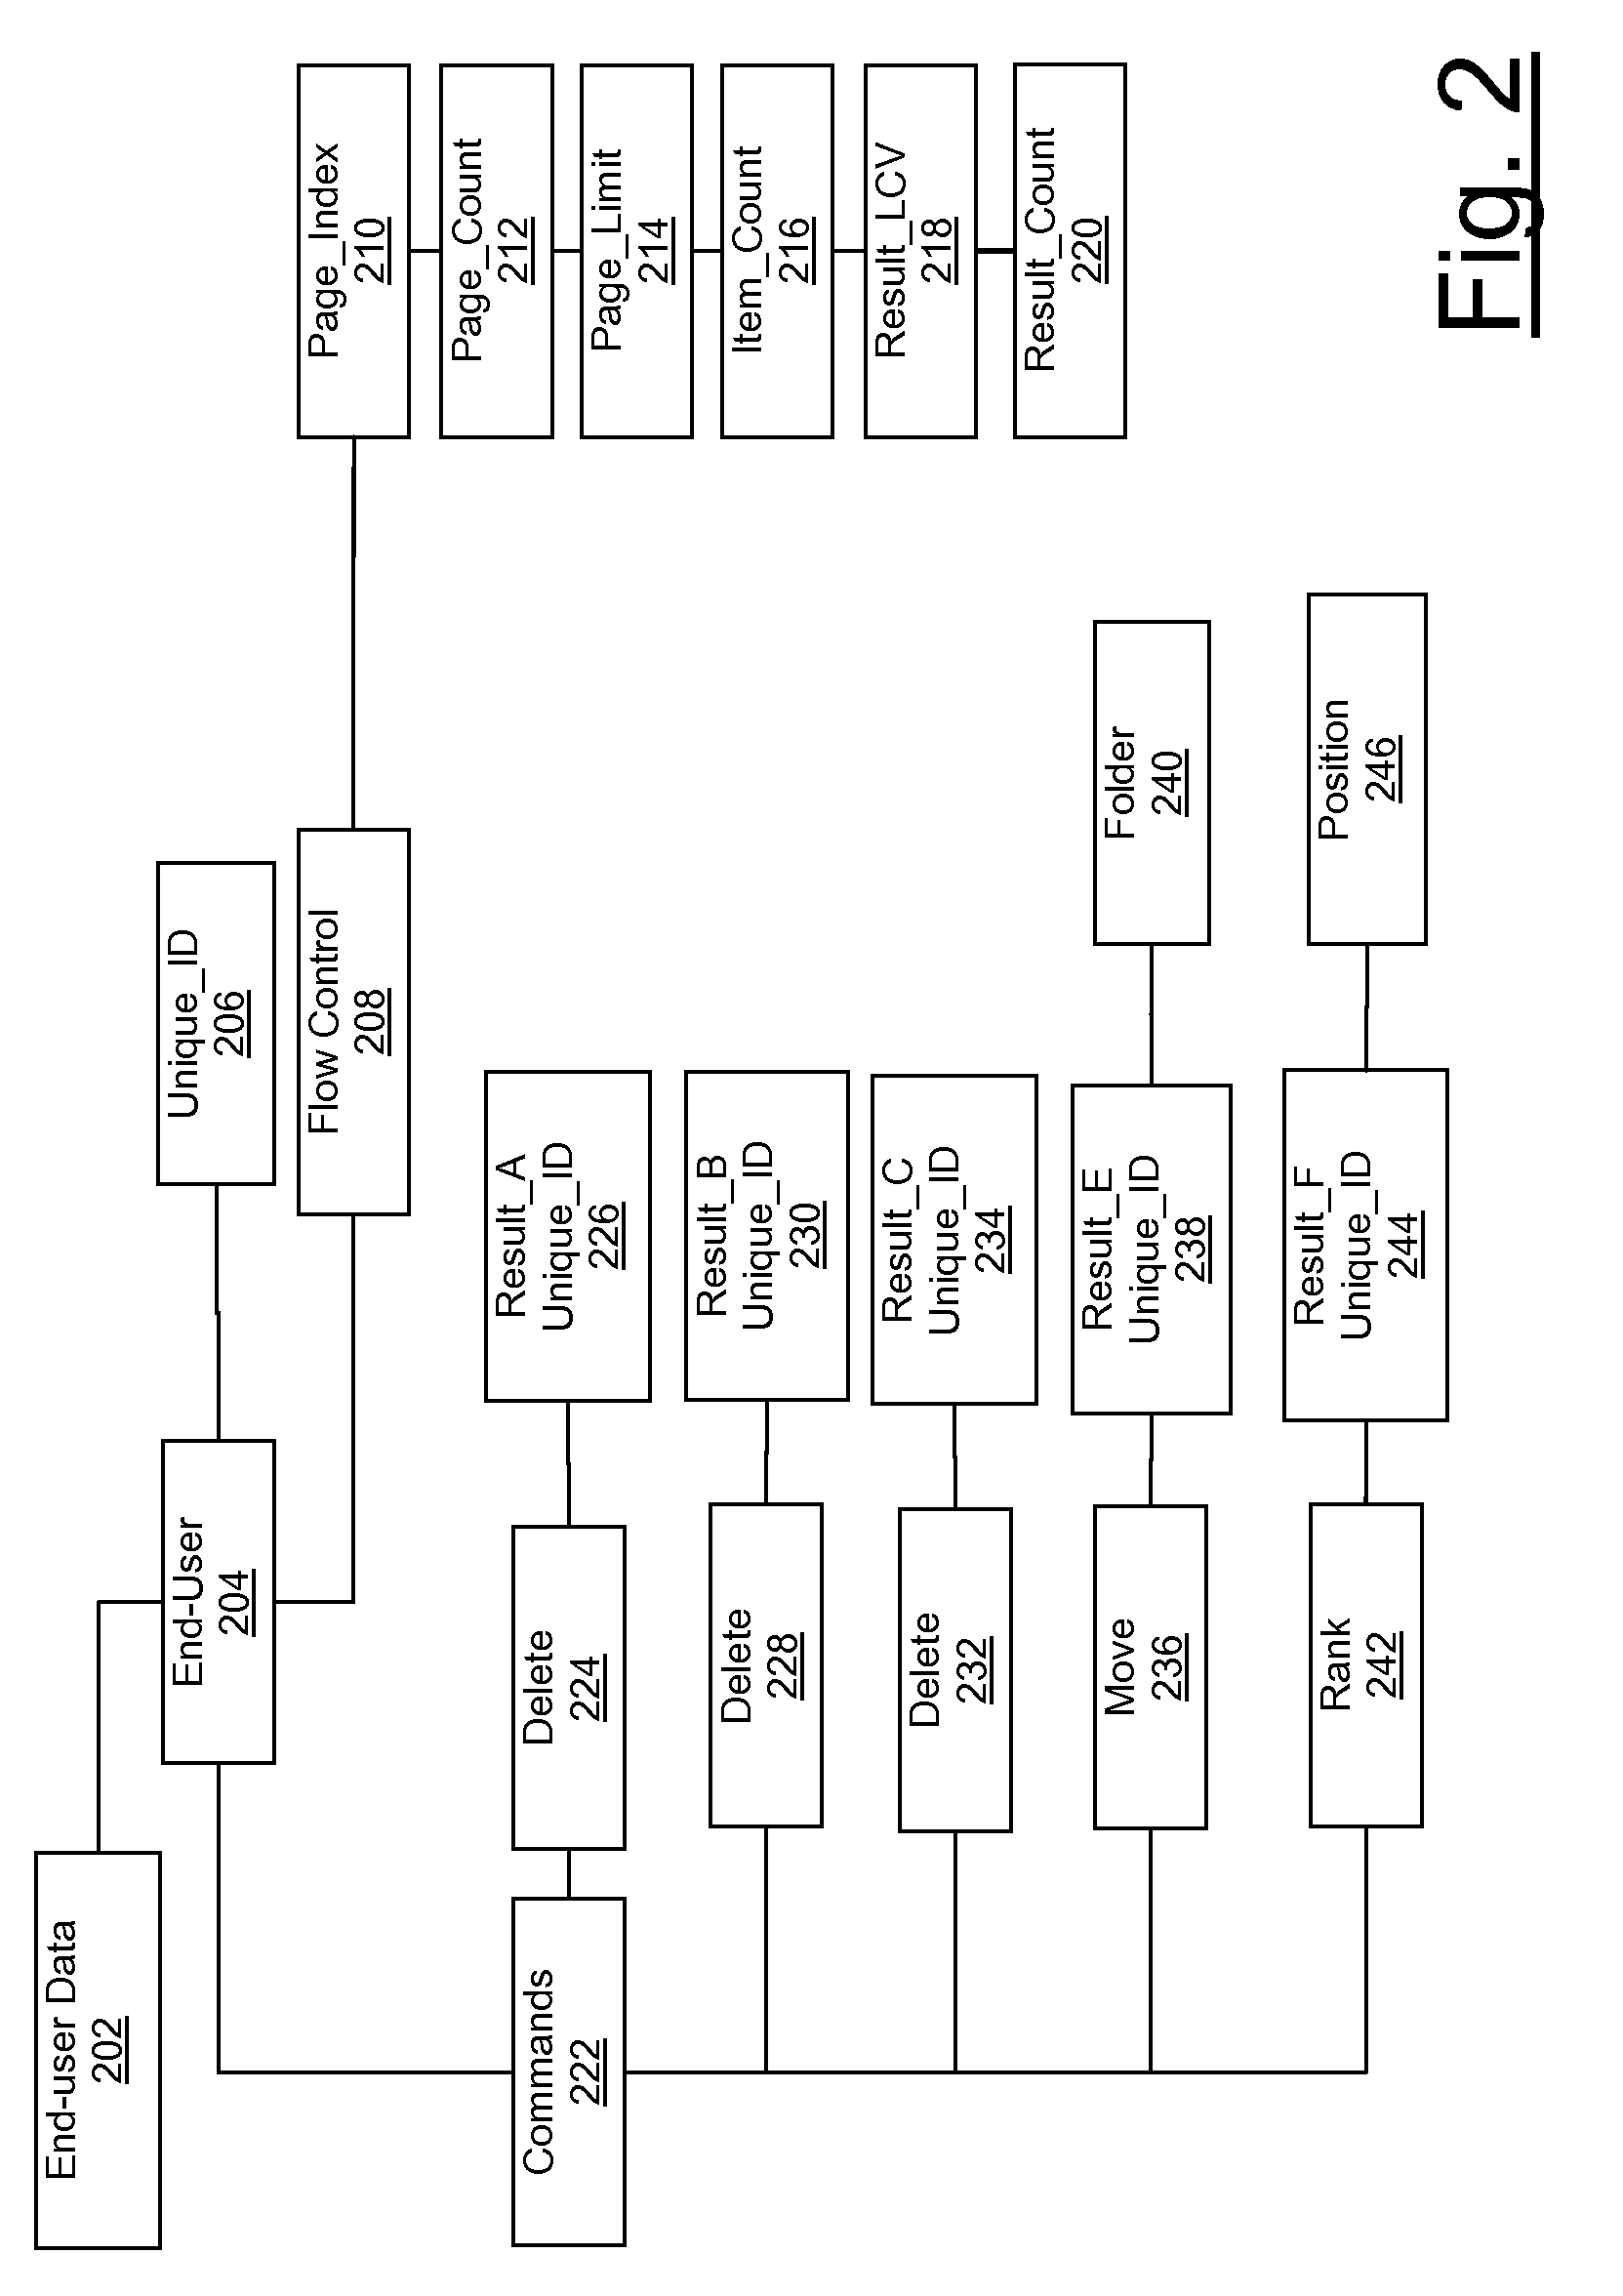 System and method to facilitate real-time end-user awareness in query results through layer approach utilizing end-user interaction, loopback feedback, and automatic result feeder